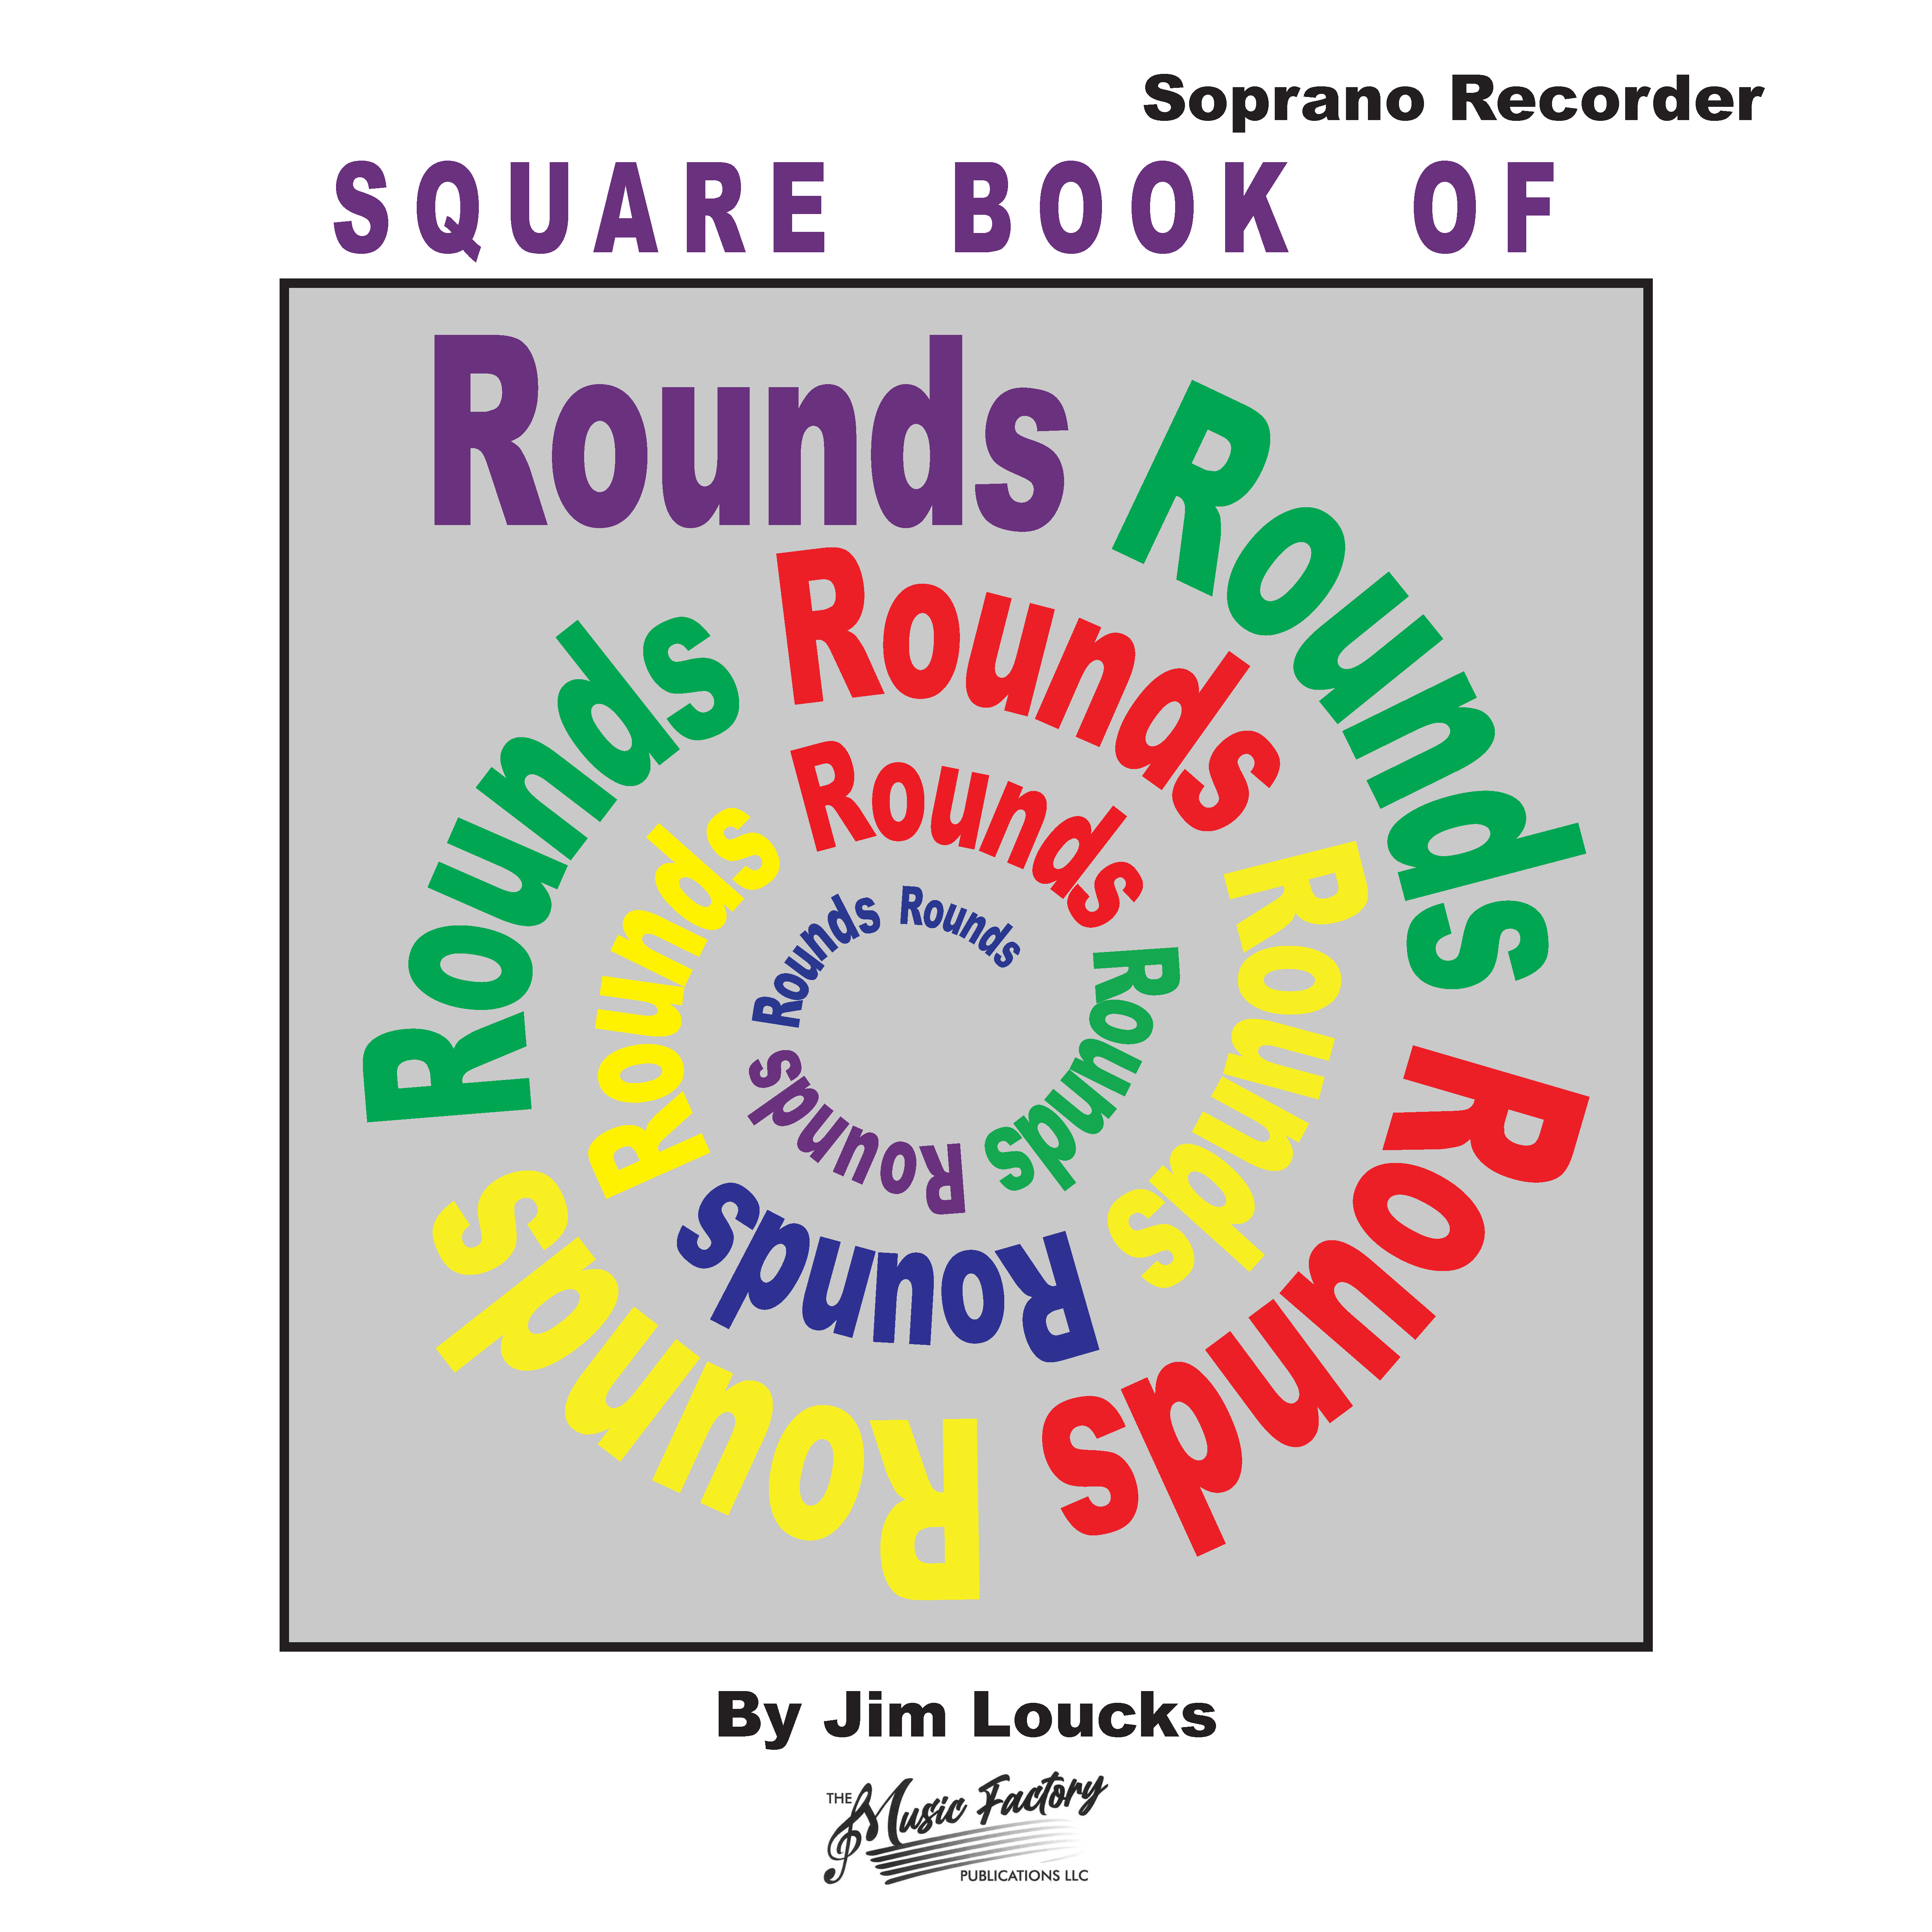 Square Book of Rounds